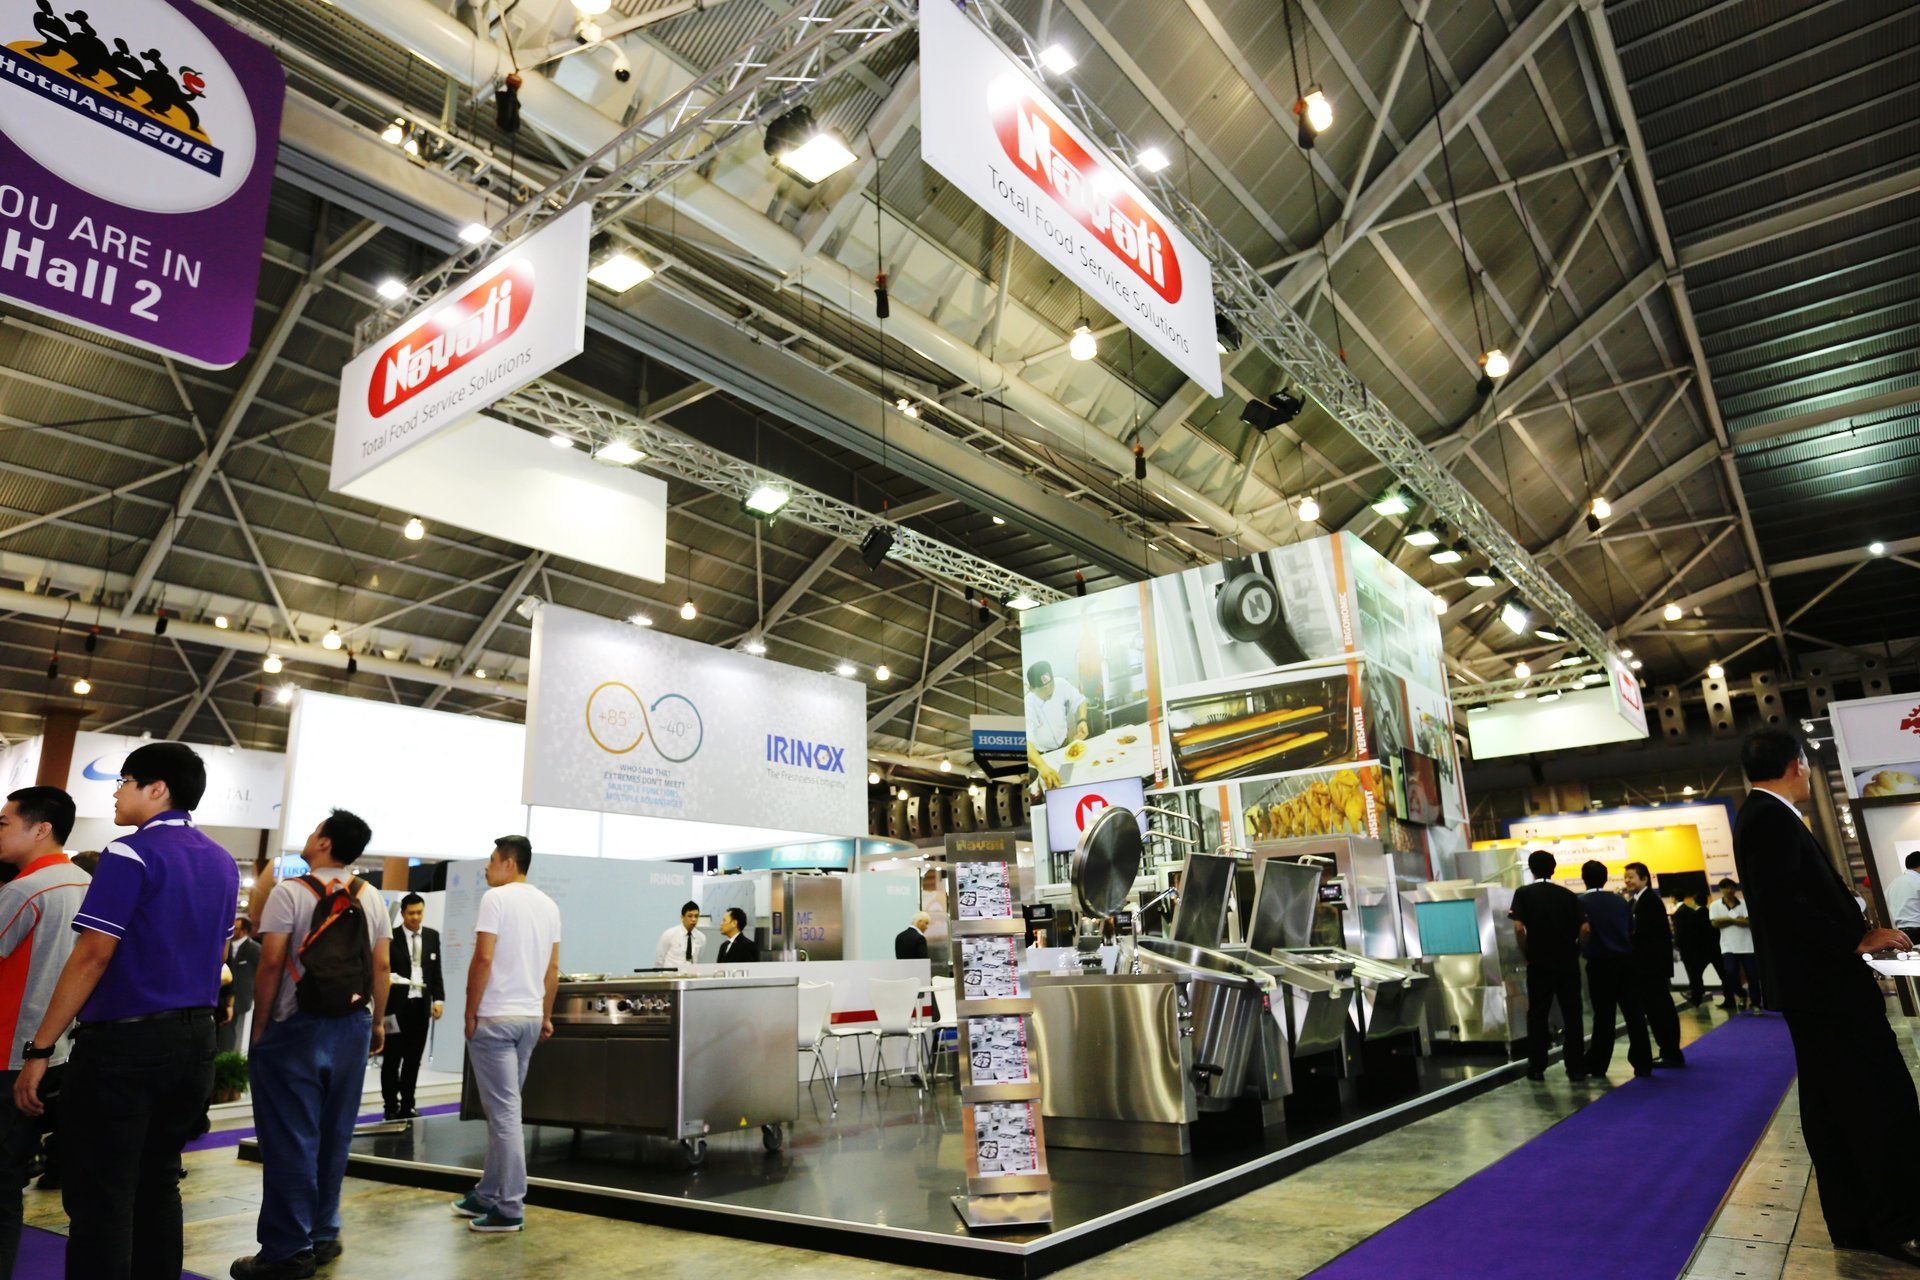 Nayati @ Food & Hotel Asia 2016. Booth designed and built by Essential Global Fairs.